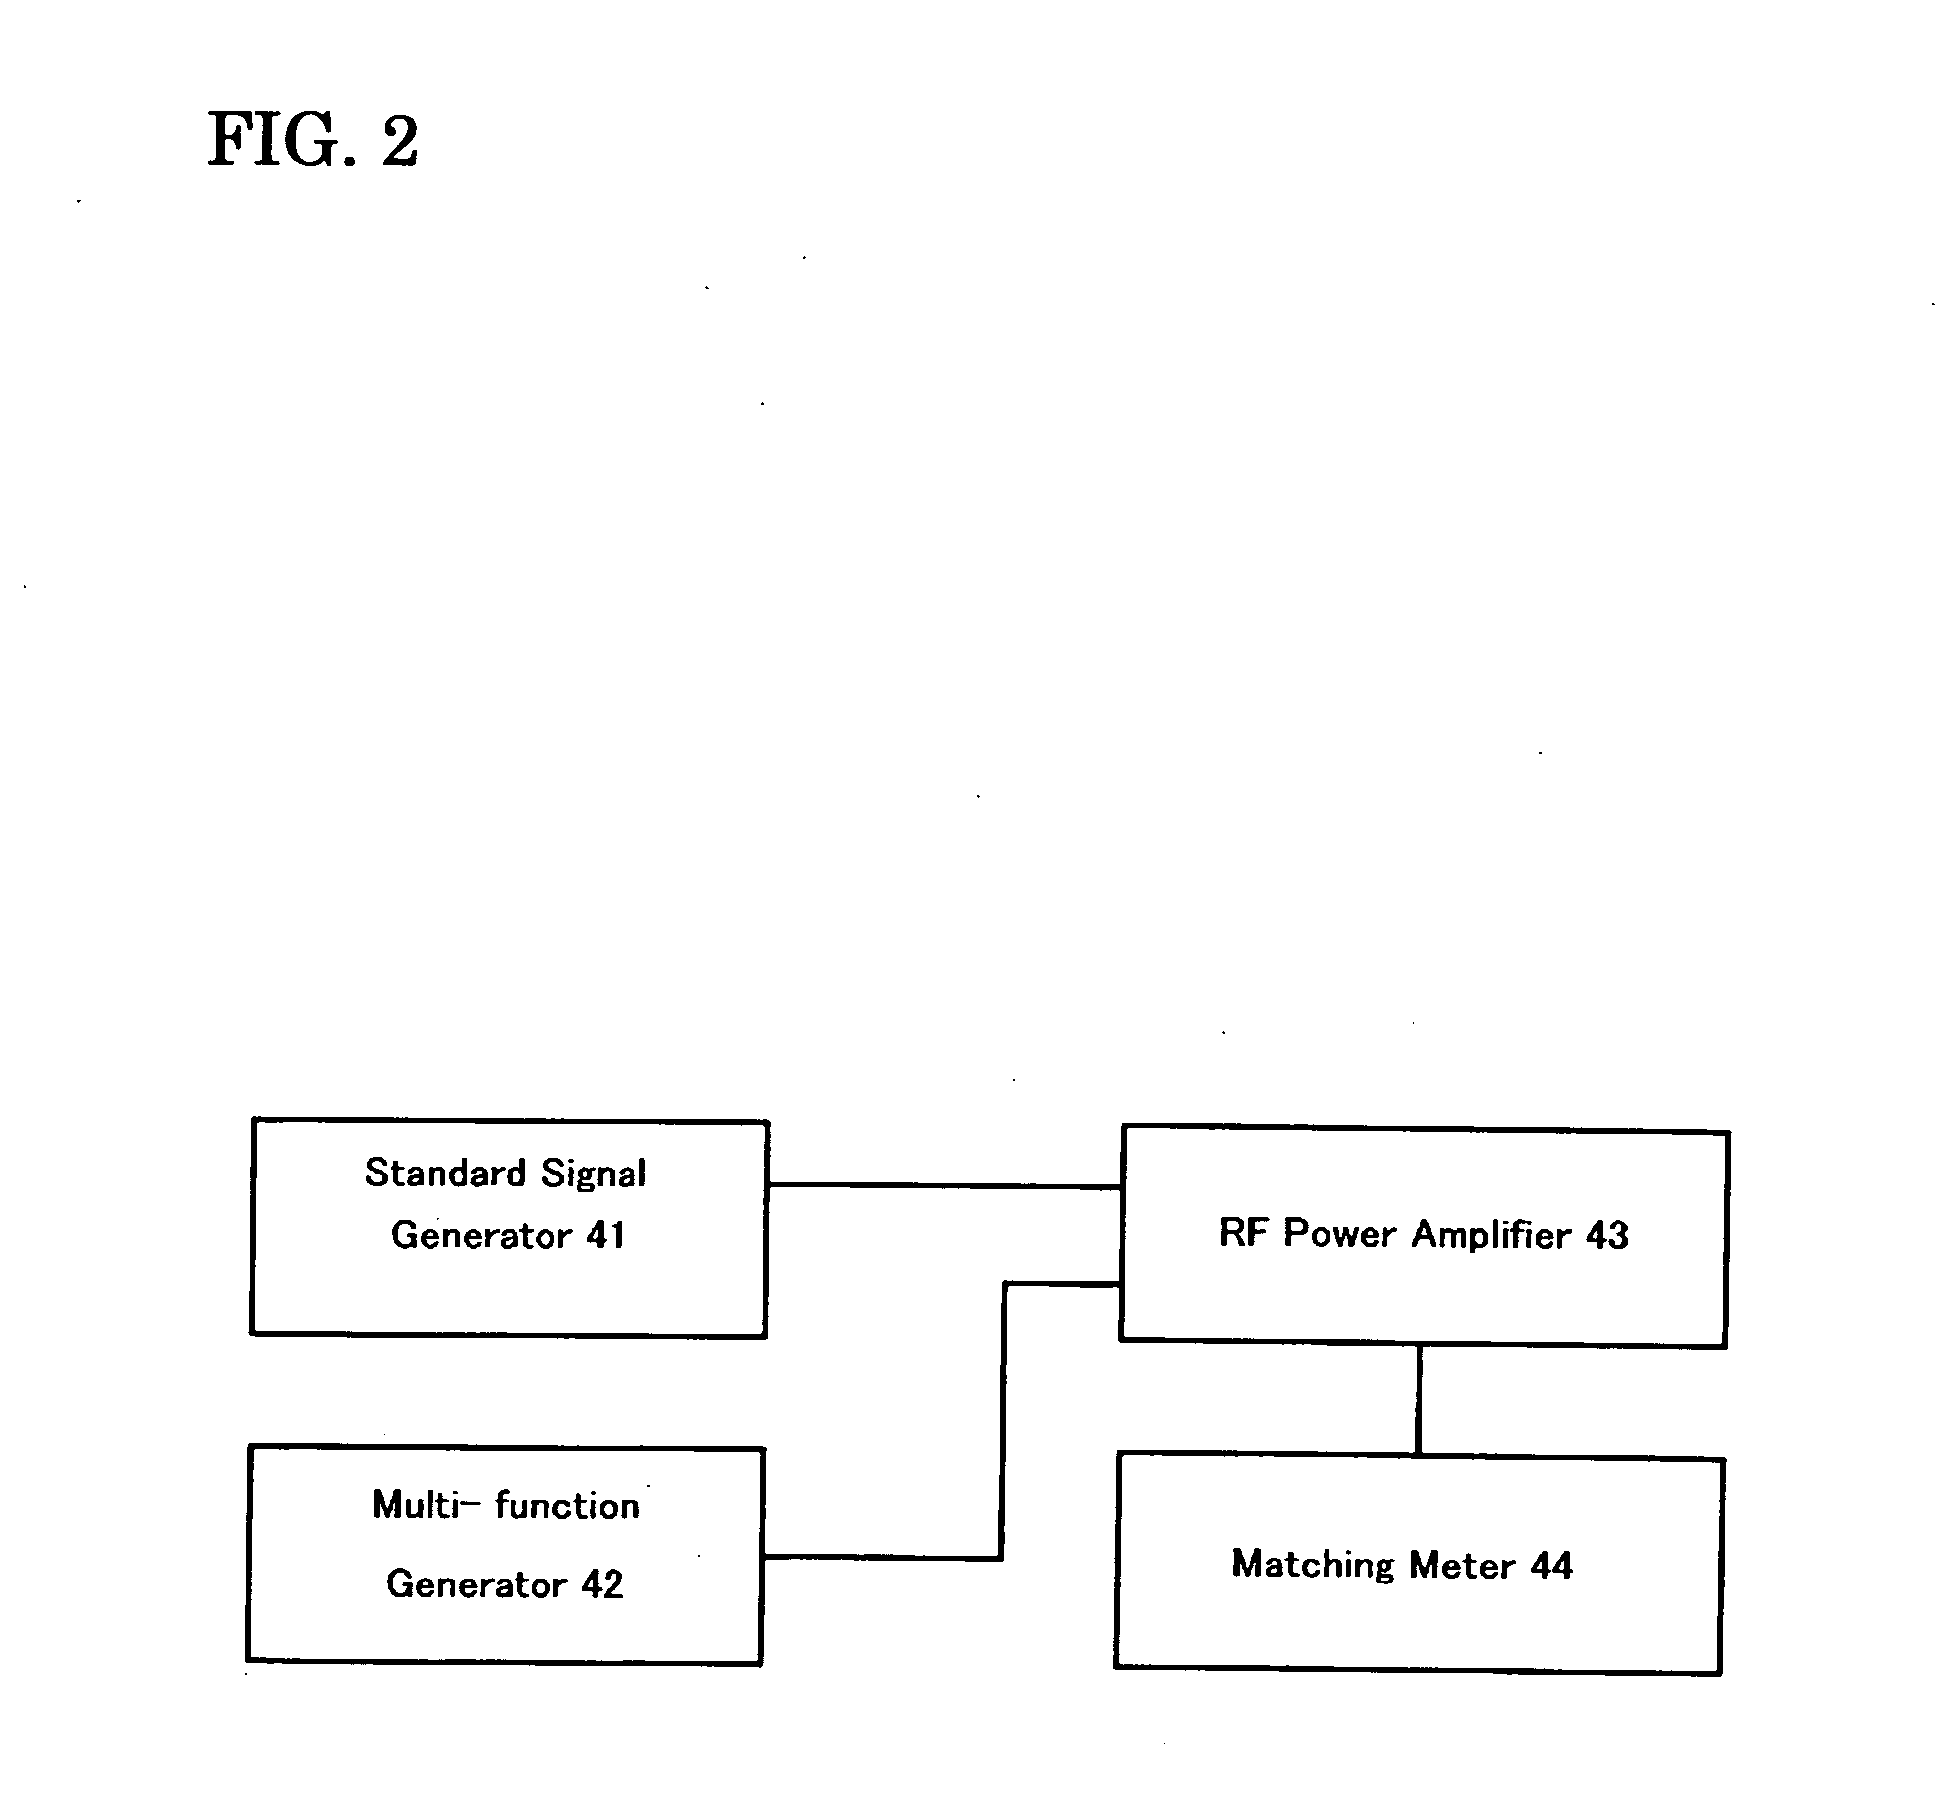 Heating apparatus using surface acoustic wave